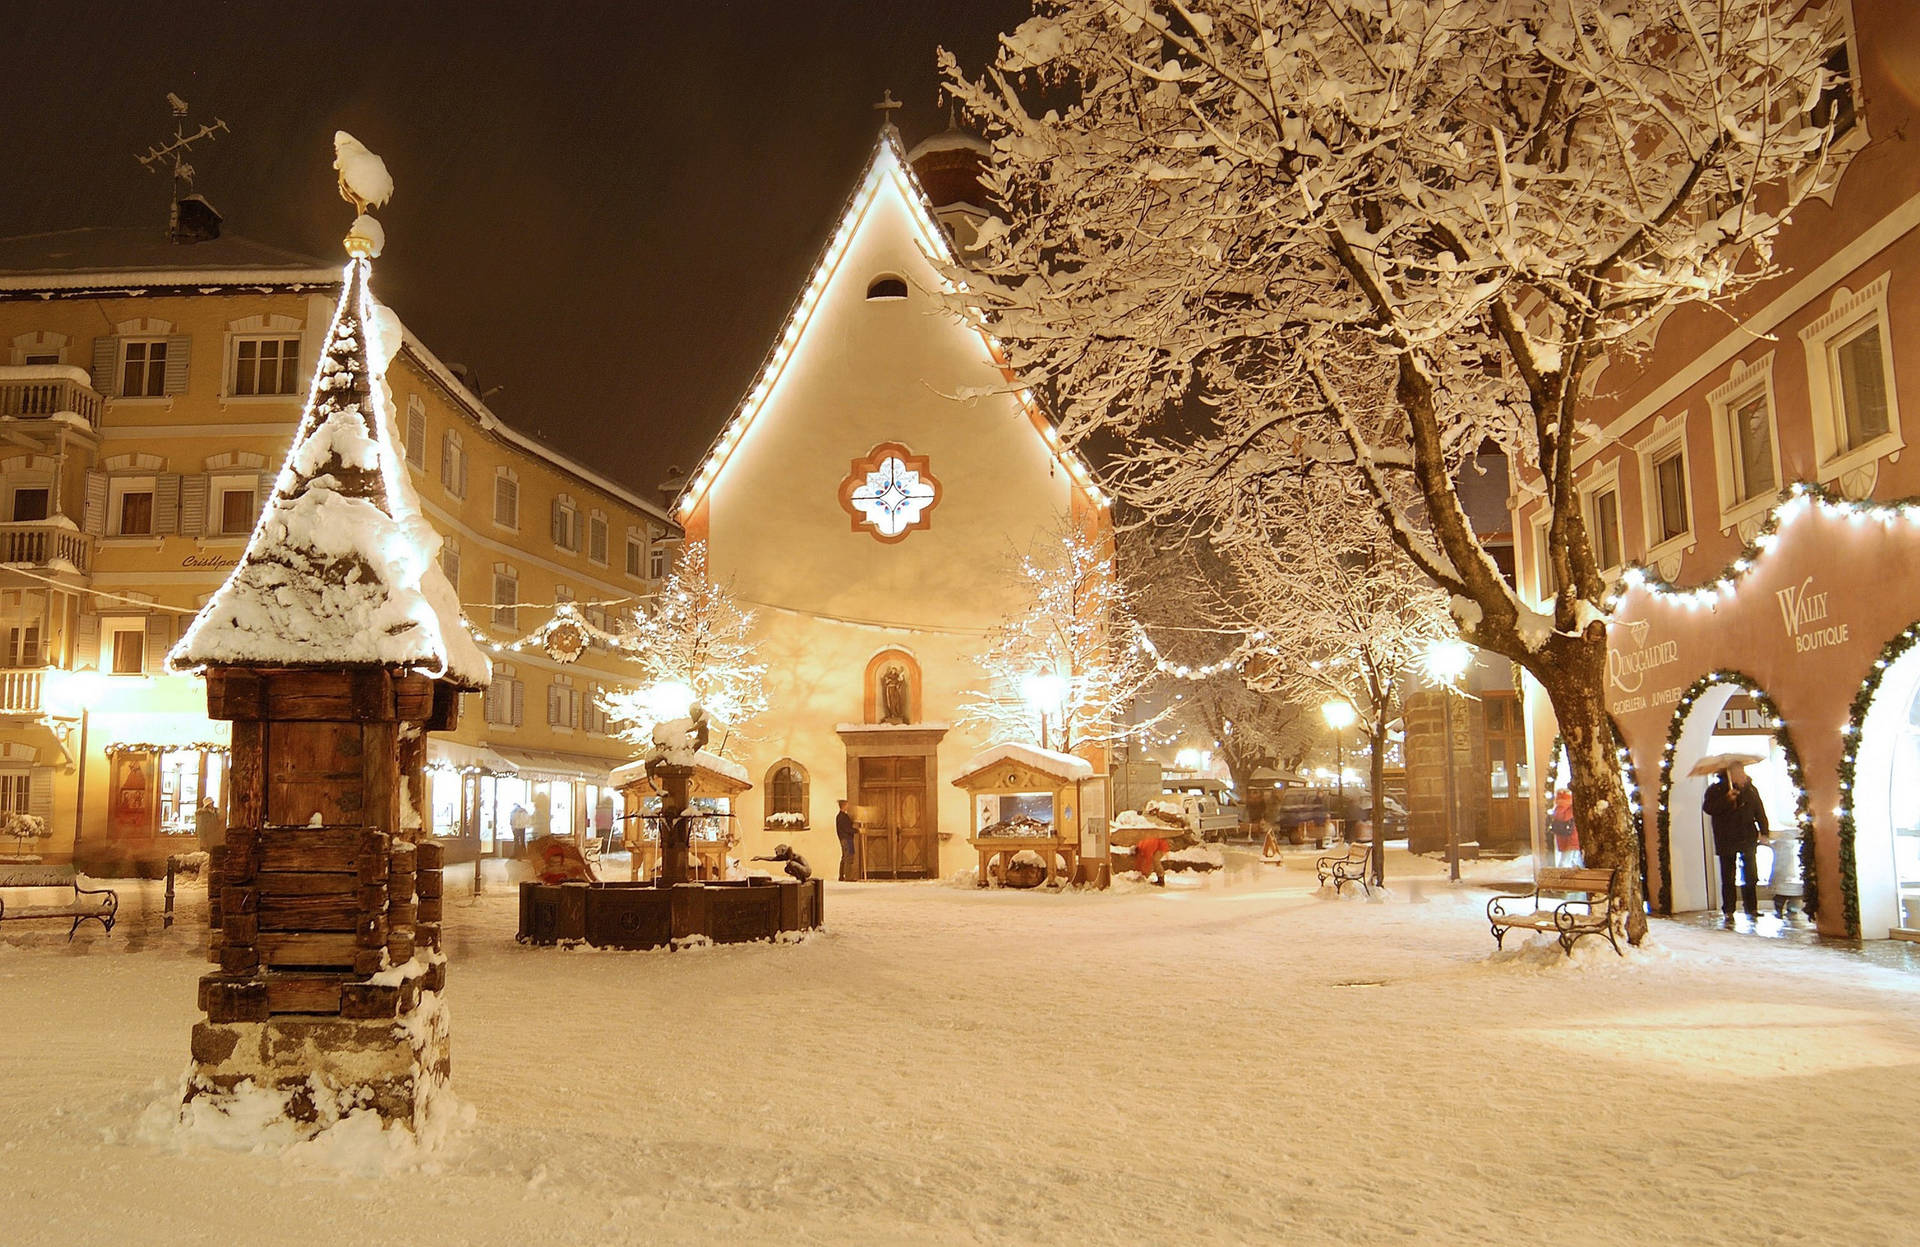 Snowy Christmas Town Wallpaper